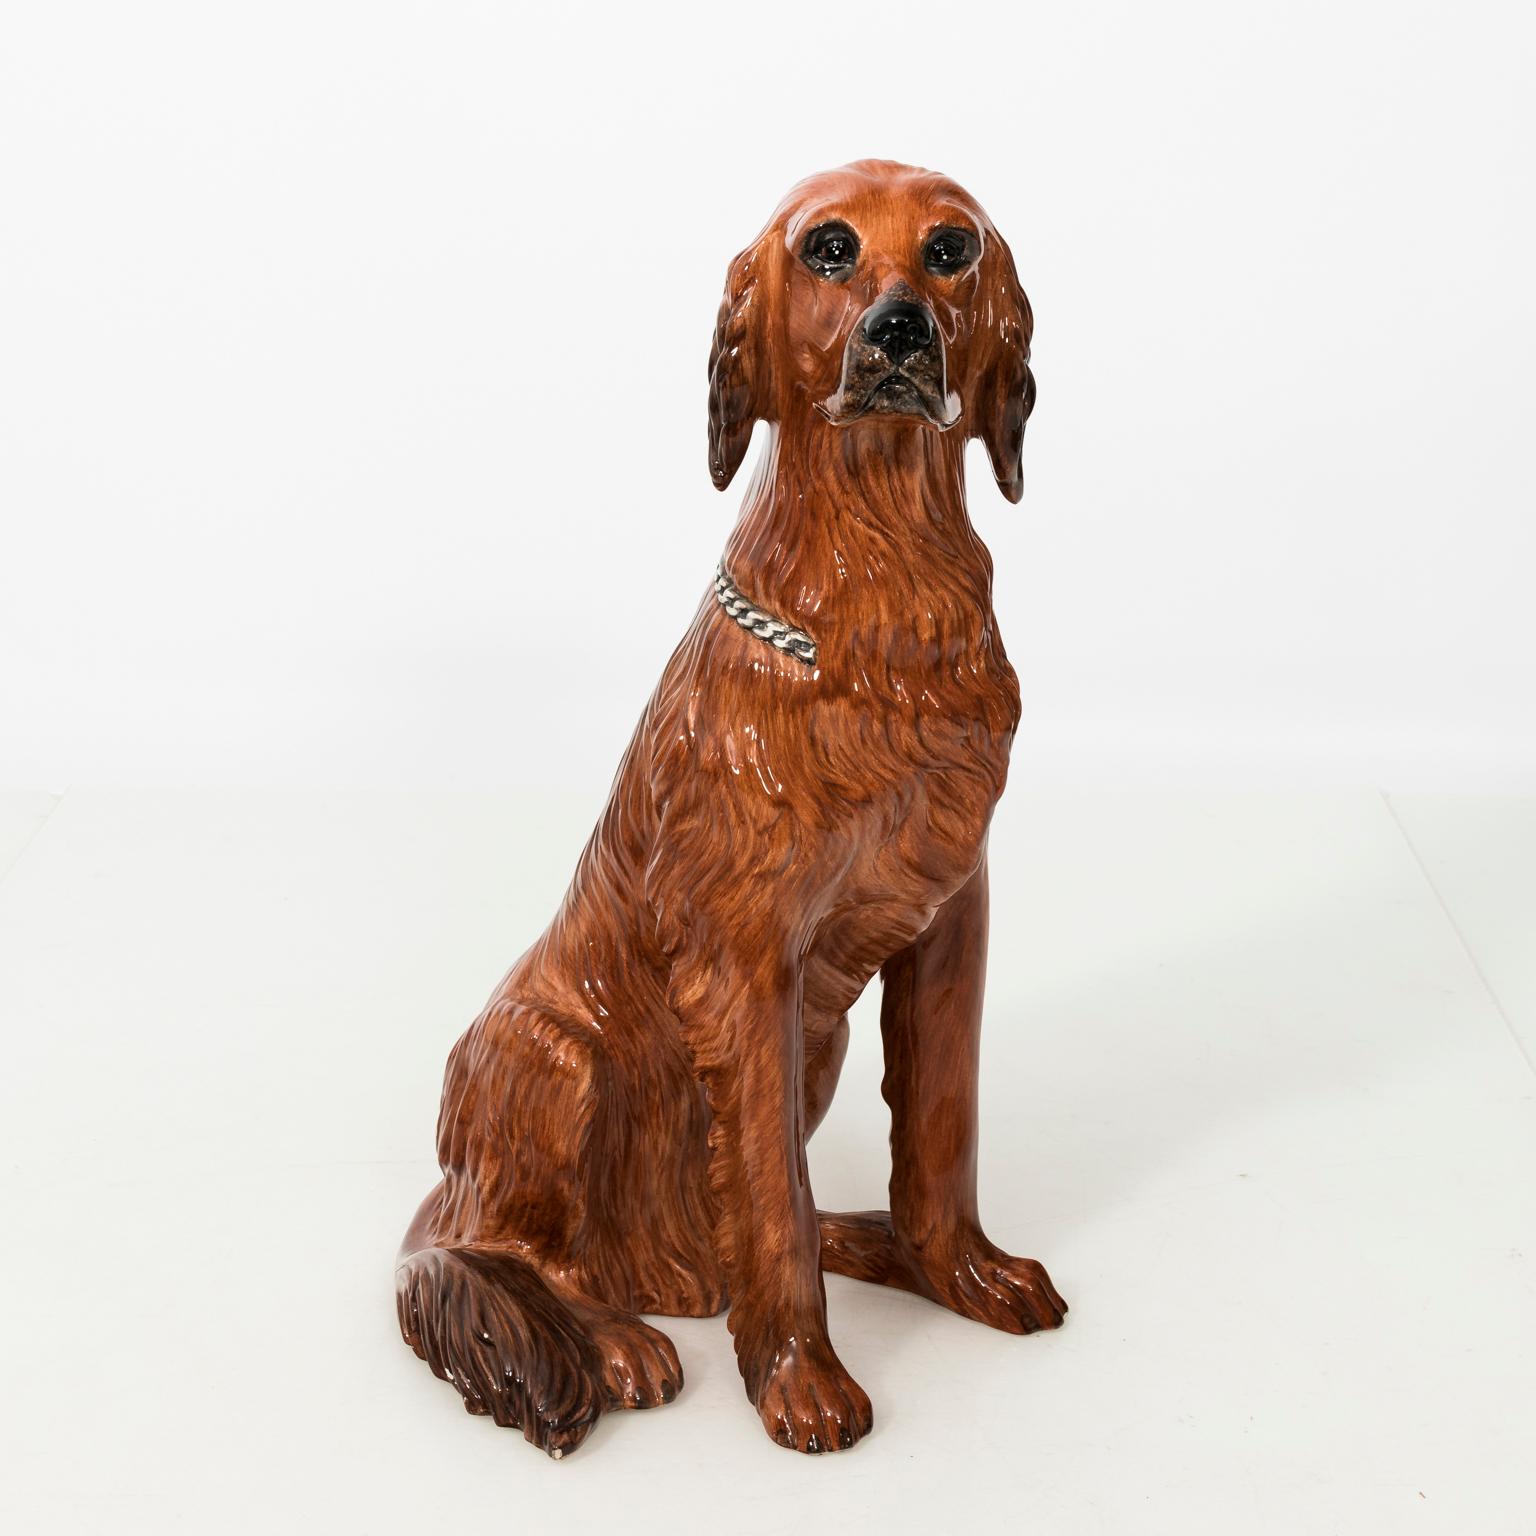 Ceramic Irish Setter statue from Italy with painted features, circa 1970.
 